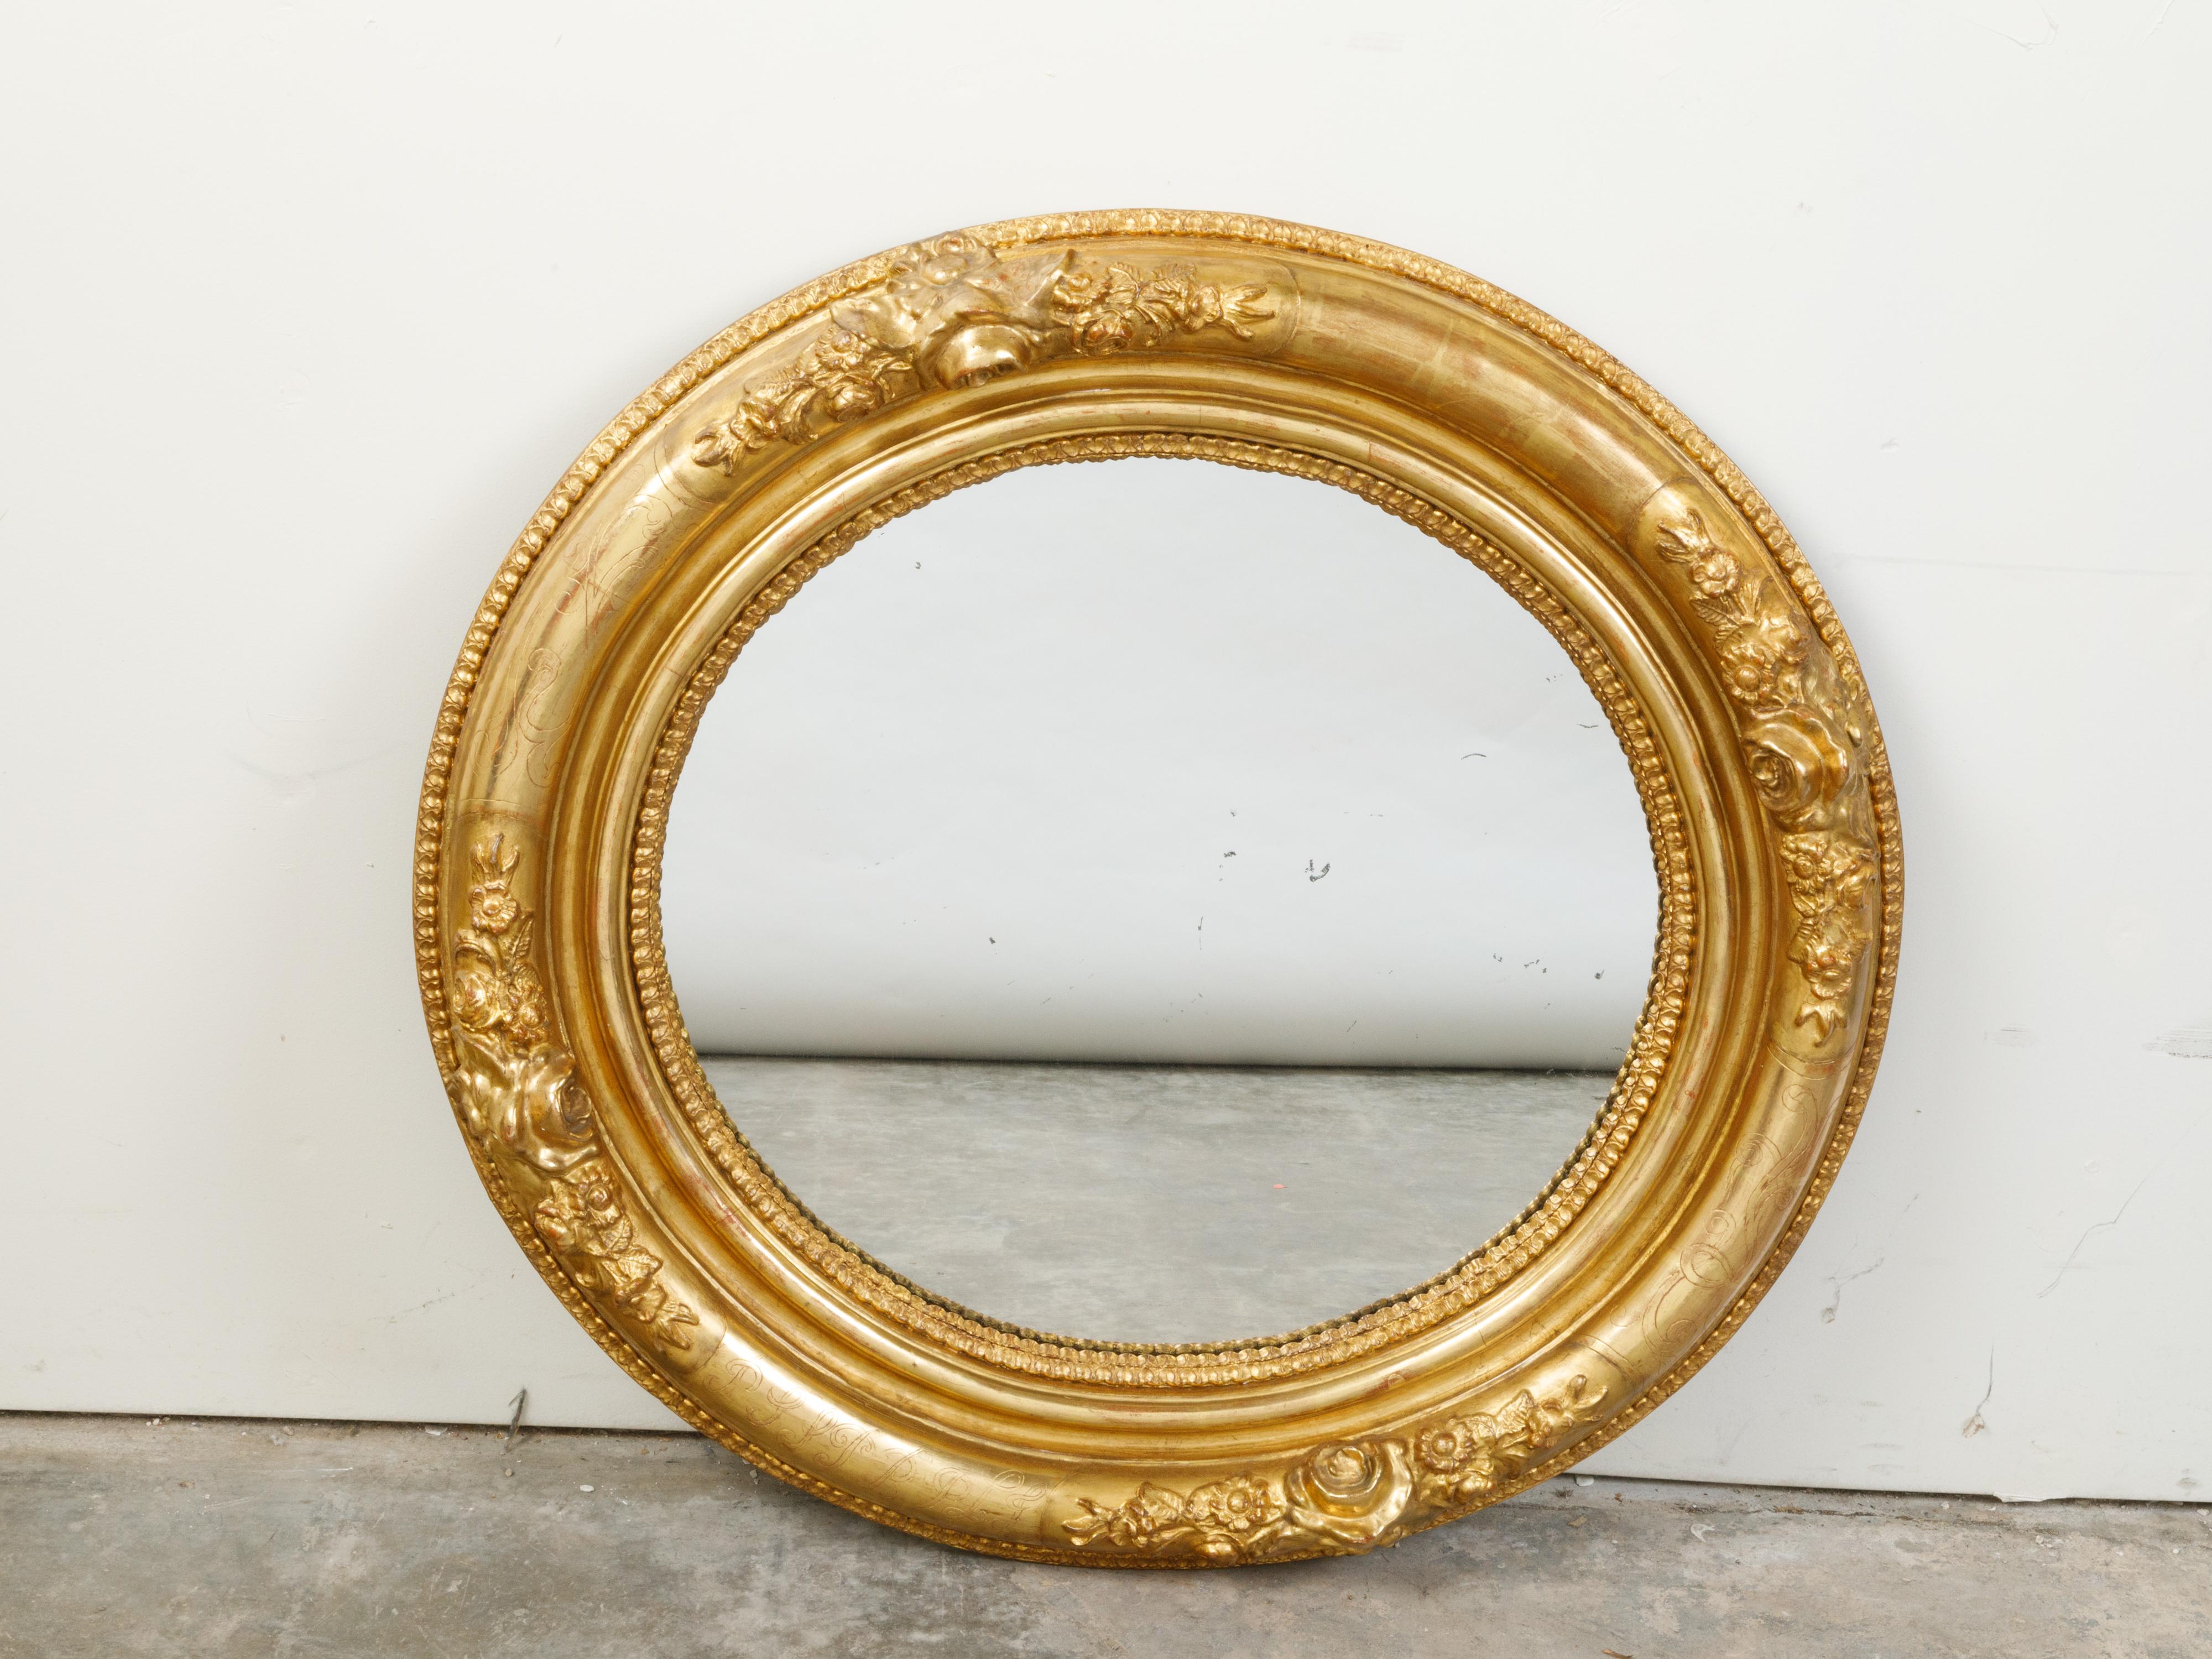 An English giltwood round mirror from the 19th century, with carved flowers and etched motifs. Created in England during the 19th century, this mirror features a circular giltwood frame adorned with carved flowers separated from one another through